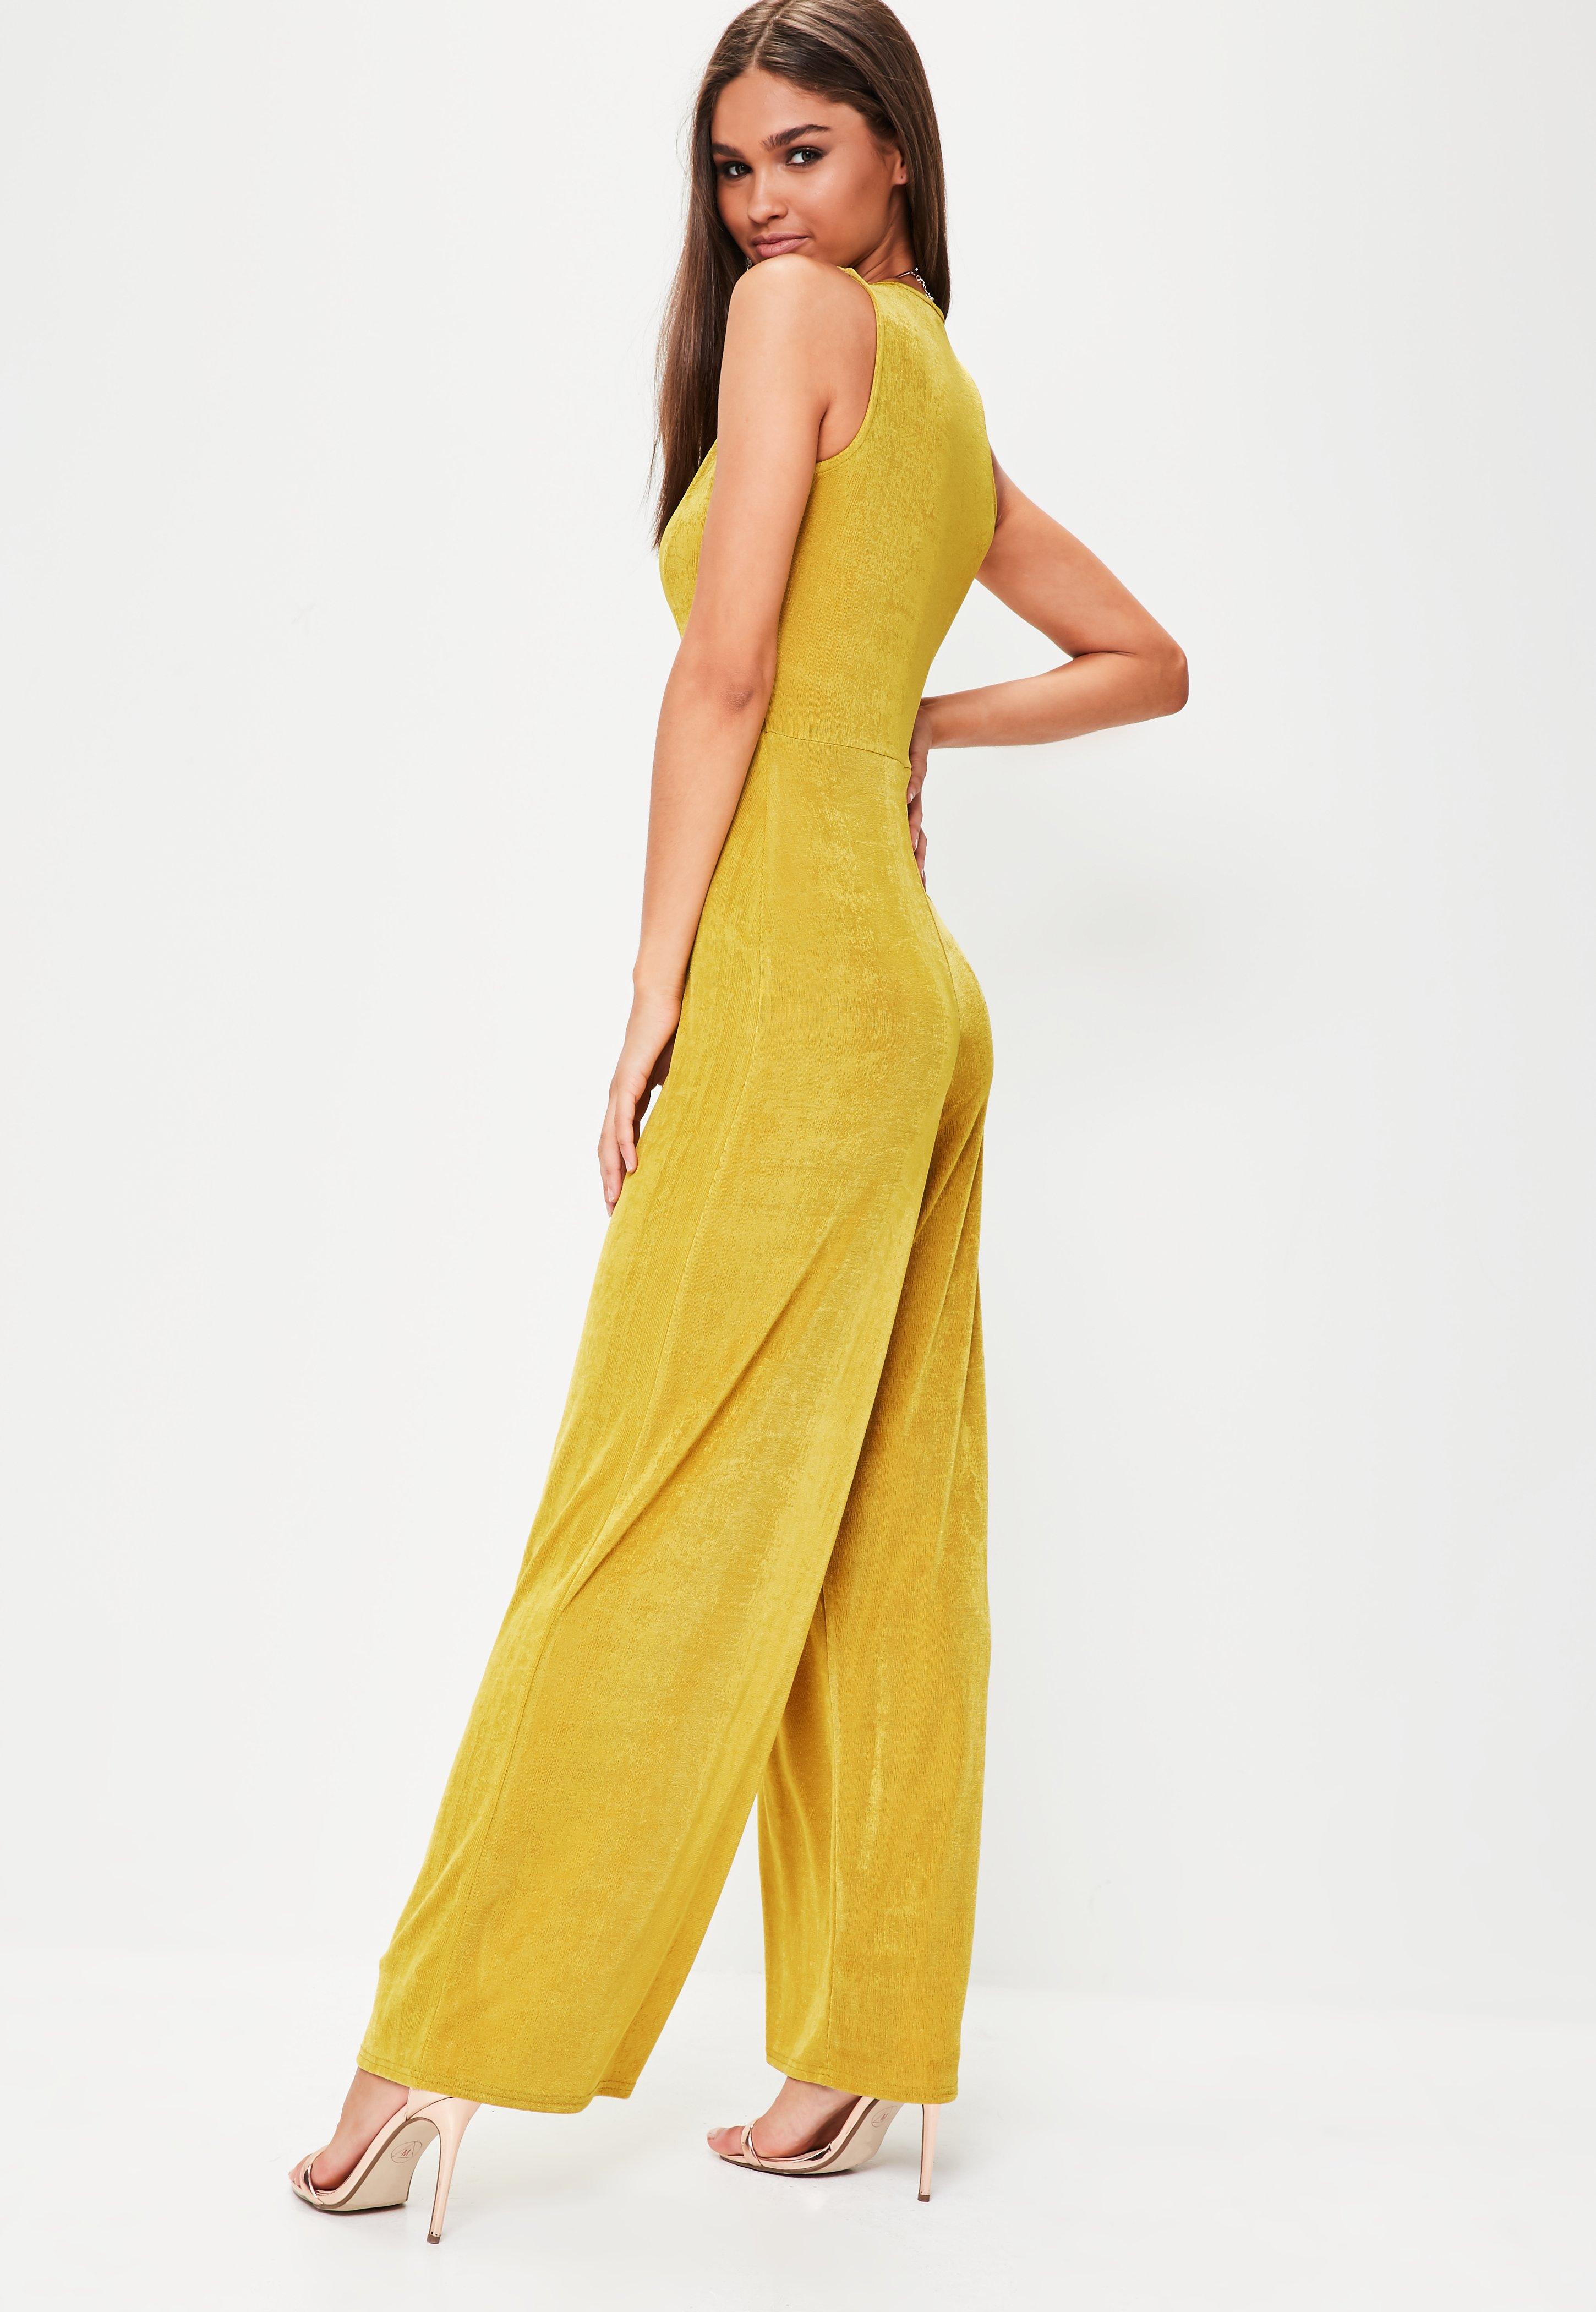 Missguided Yellow Satin Multi Way Wide Leg Jumpsuit - Lyst